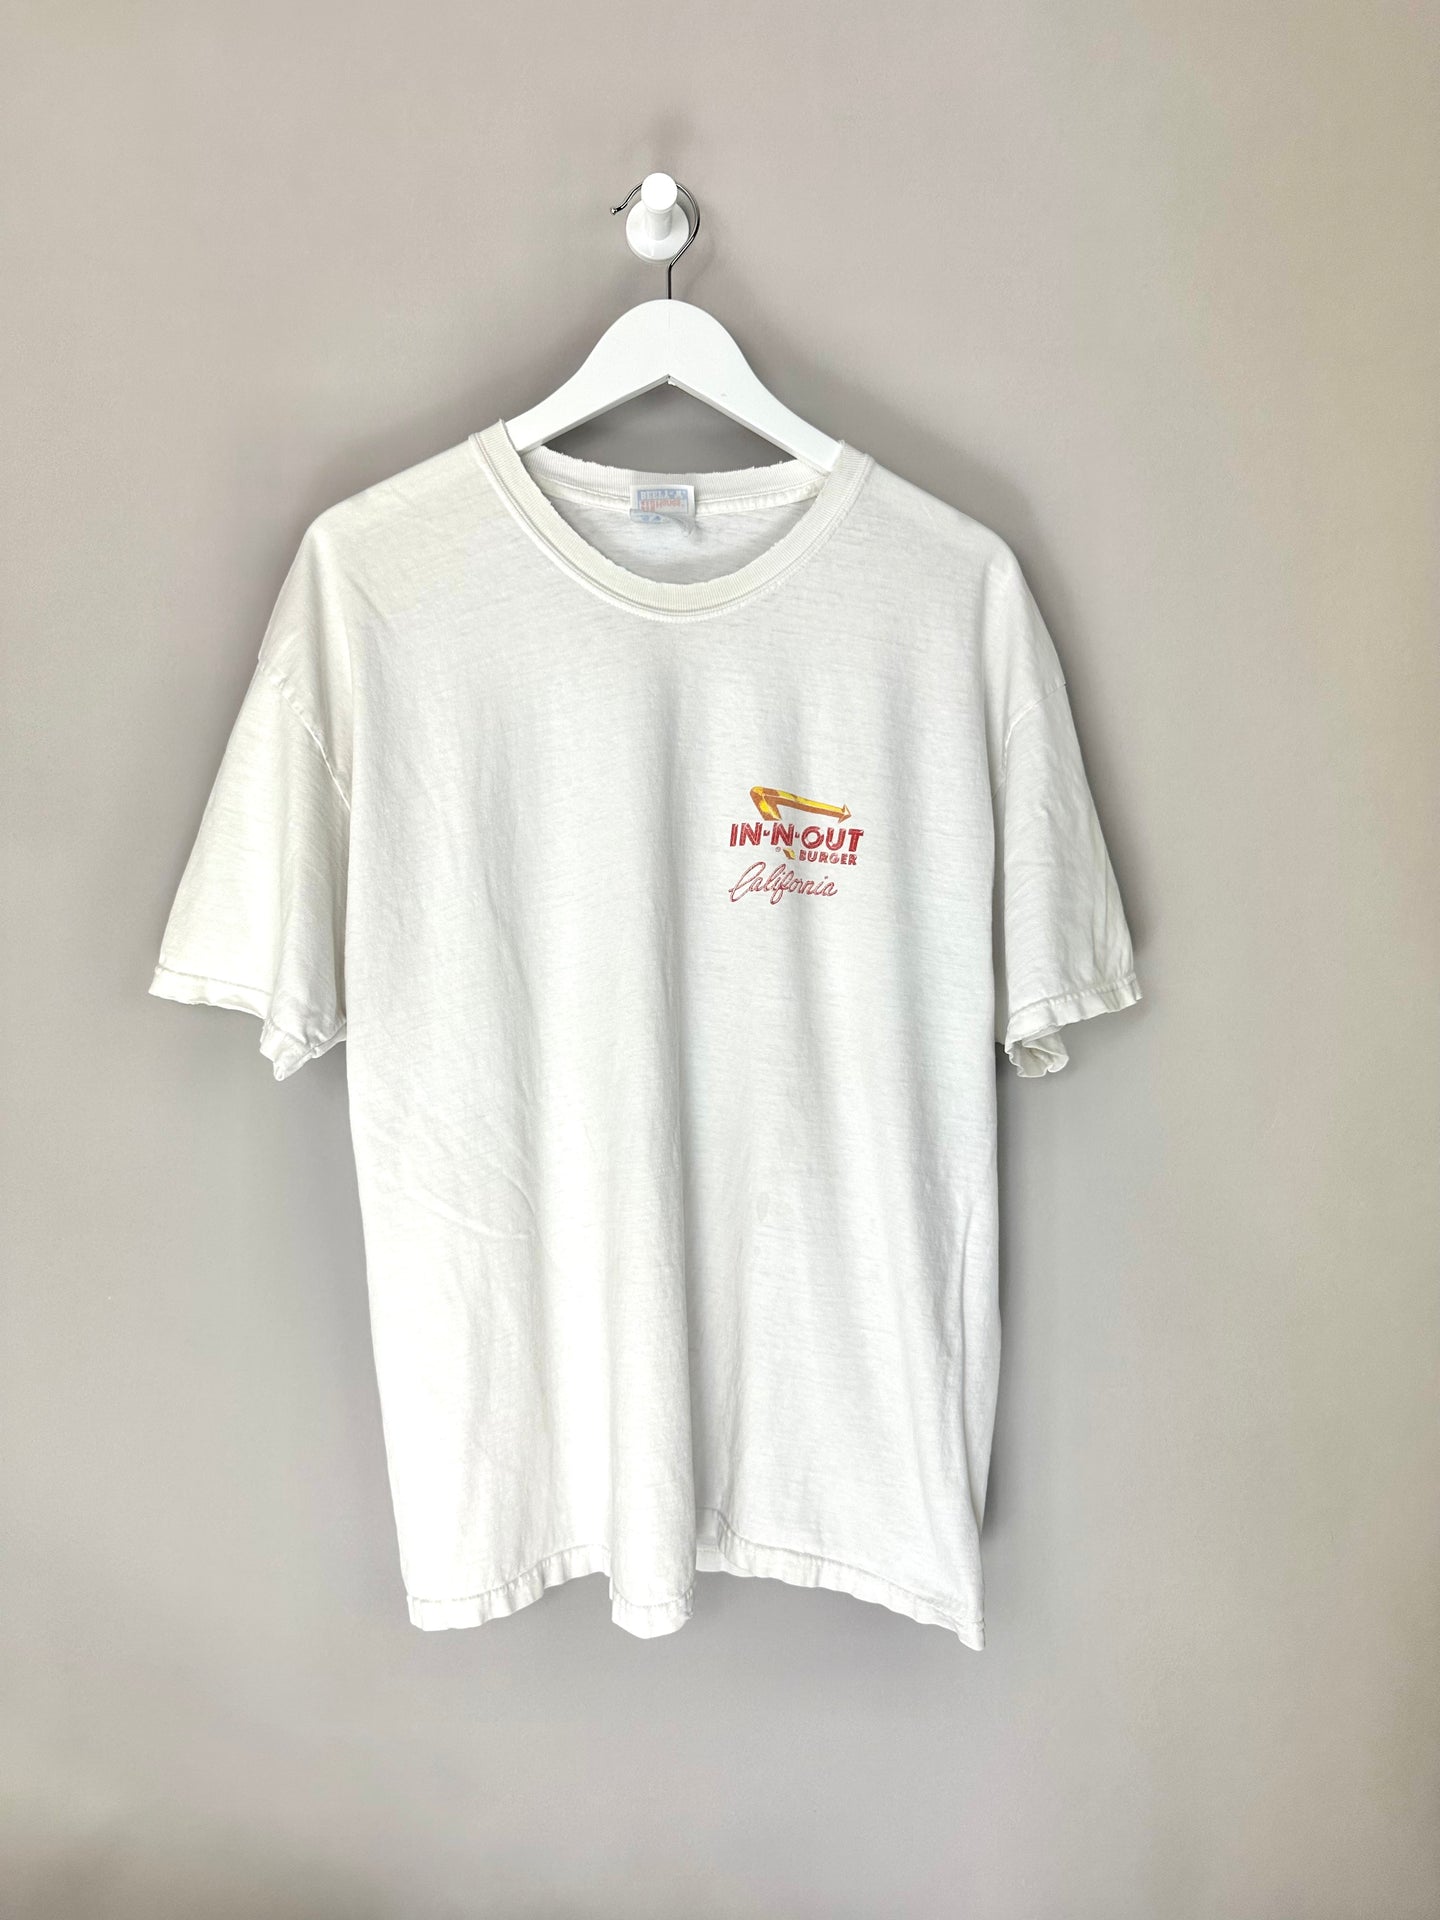 90s In N Out T Shirt - XL